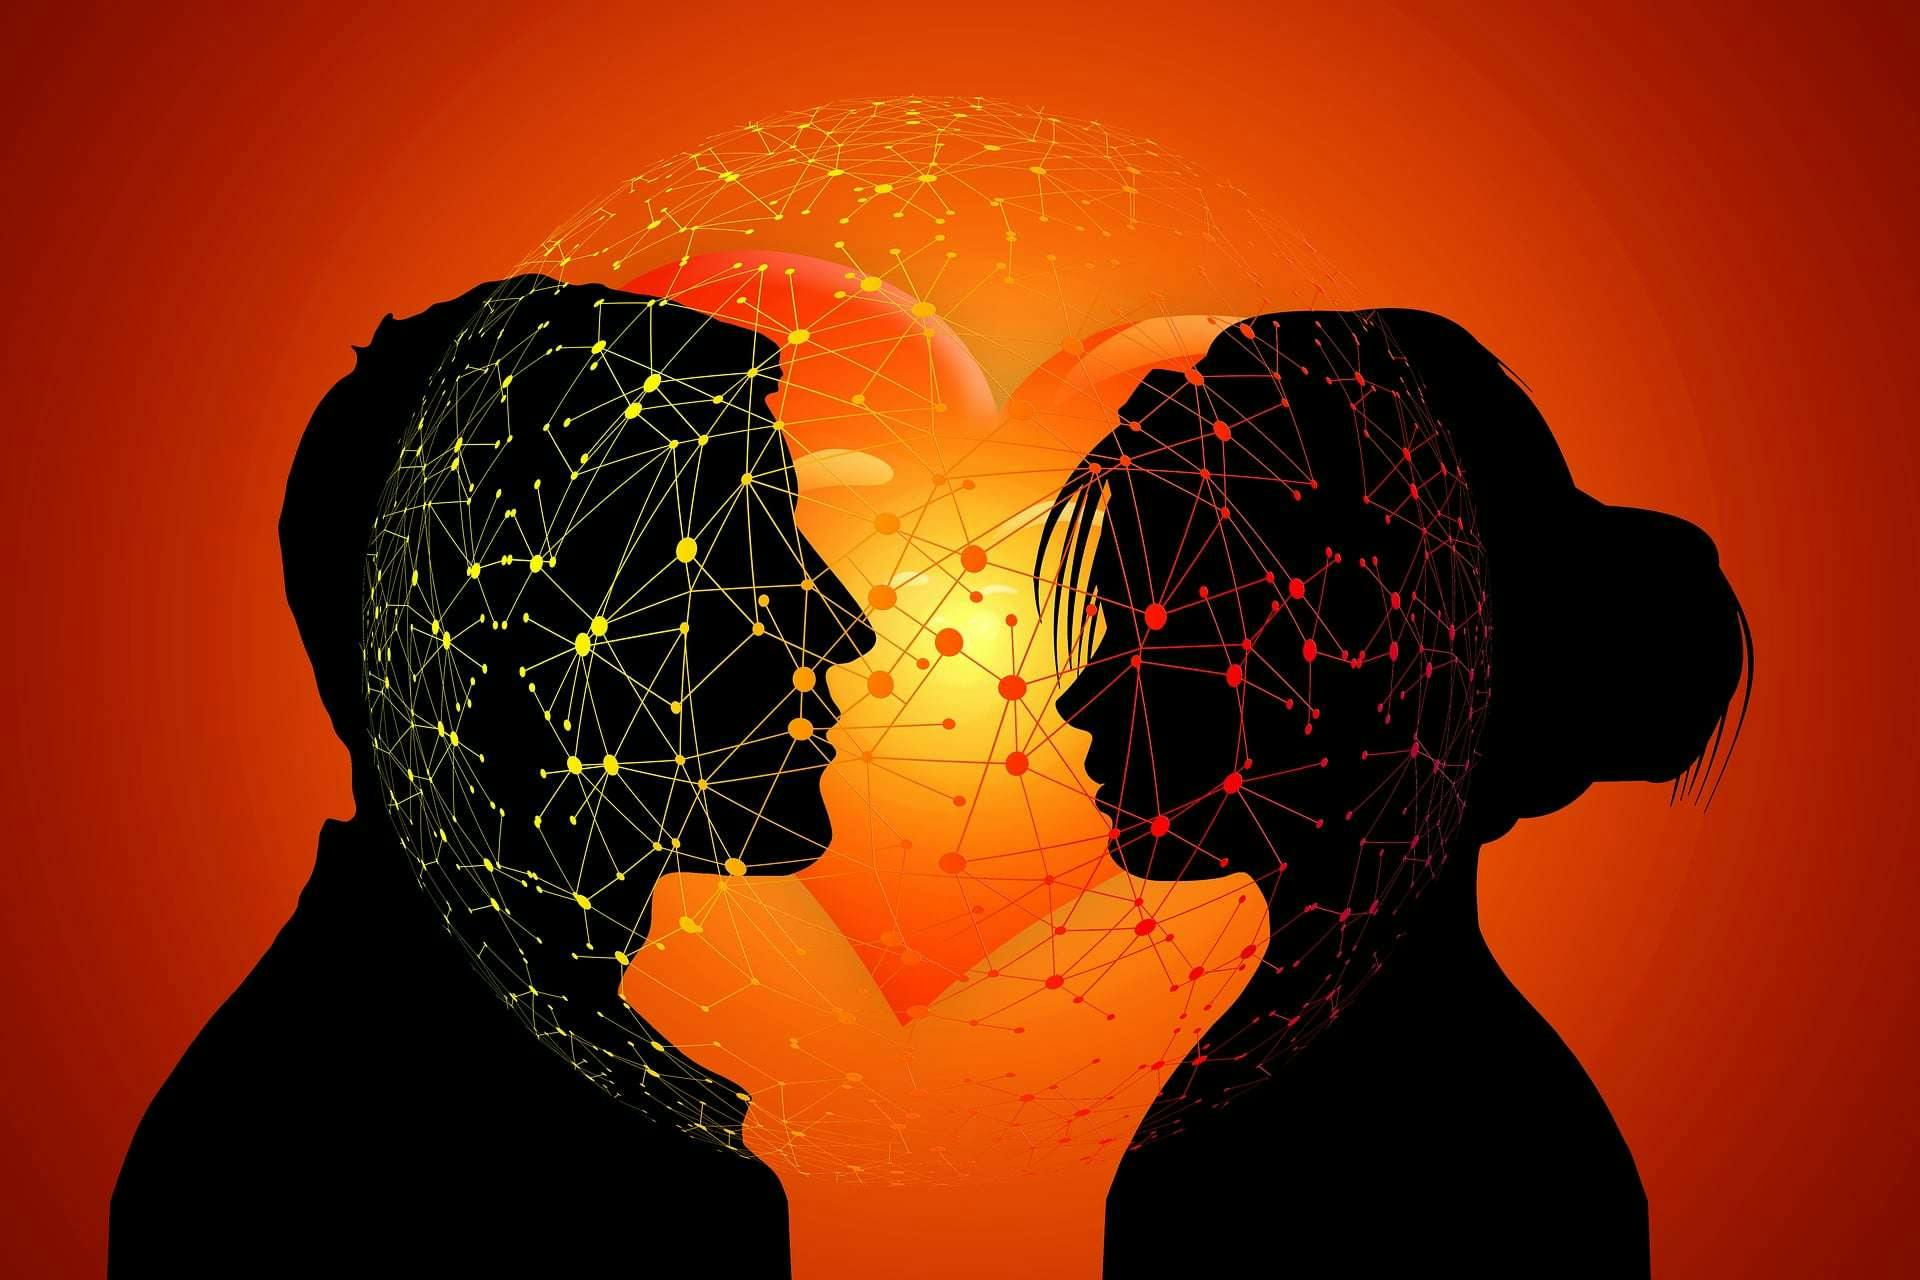 Silhouette of man and women in front of a heart making connections through electricity.